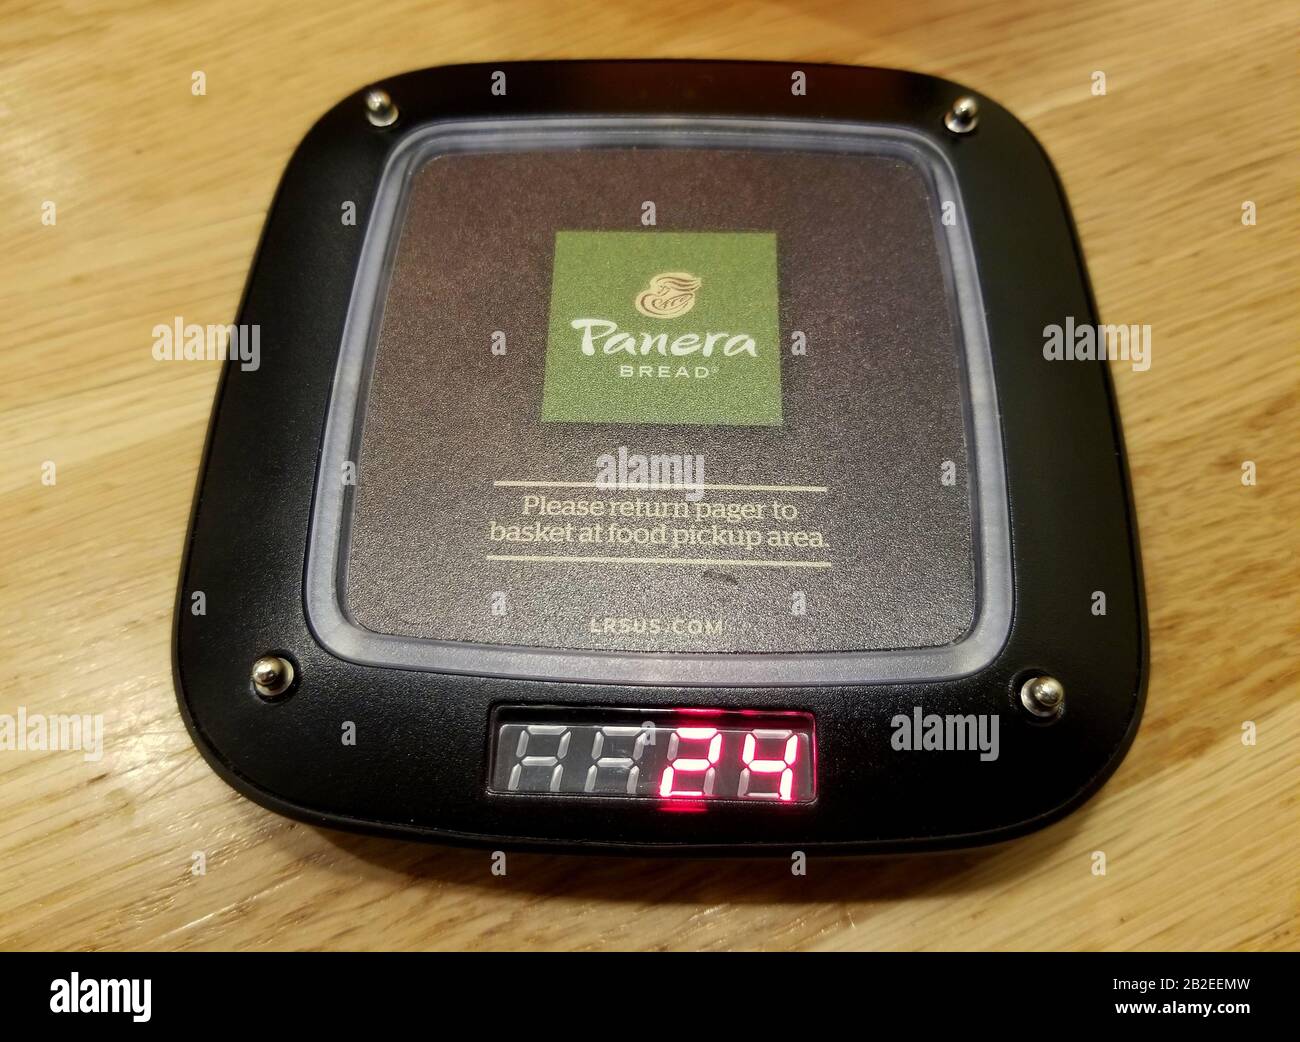 Wilmington, Delaware, U.S.A - March 2, 2020 - The wireless pager to alert the customer's order at Panera Bread Stock Photo